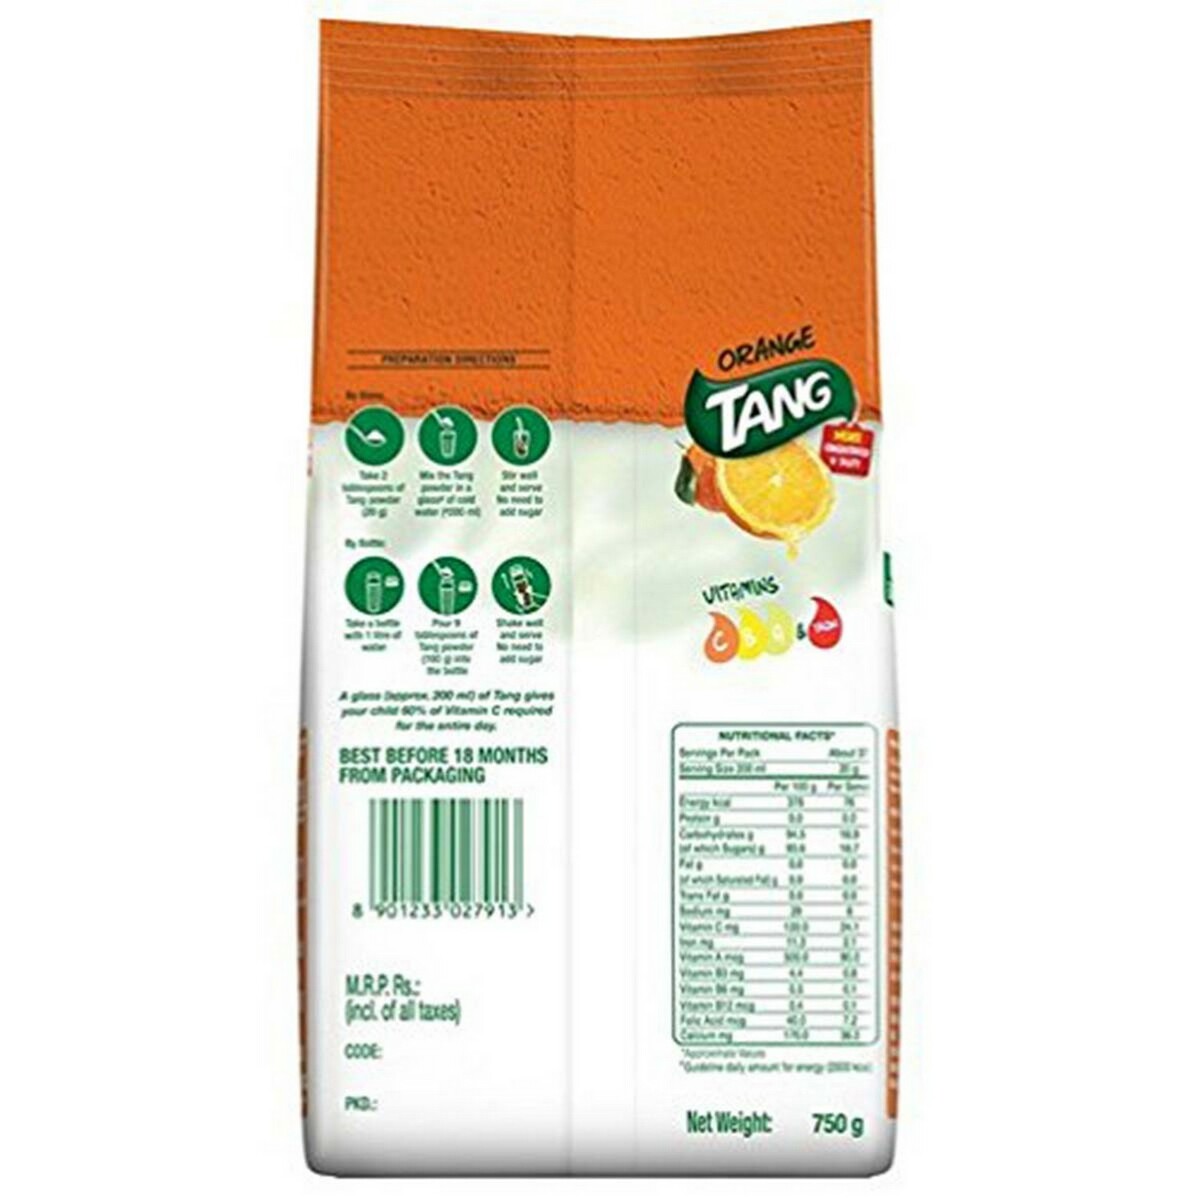 Tang Drink Orange Pouch 750g